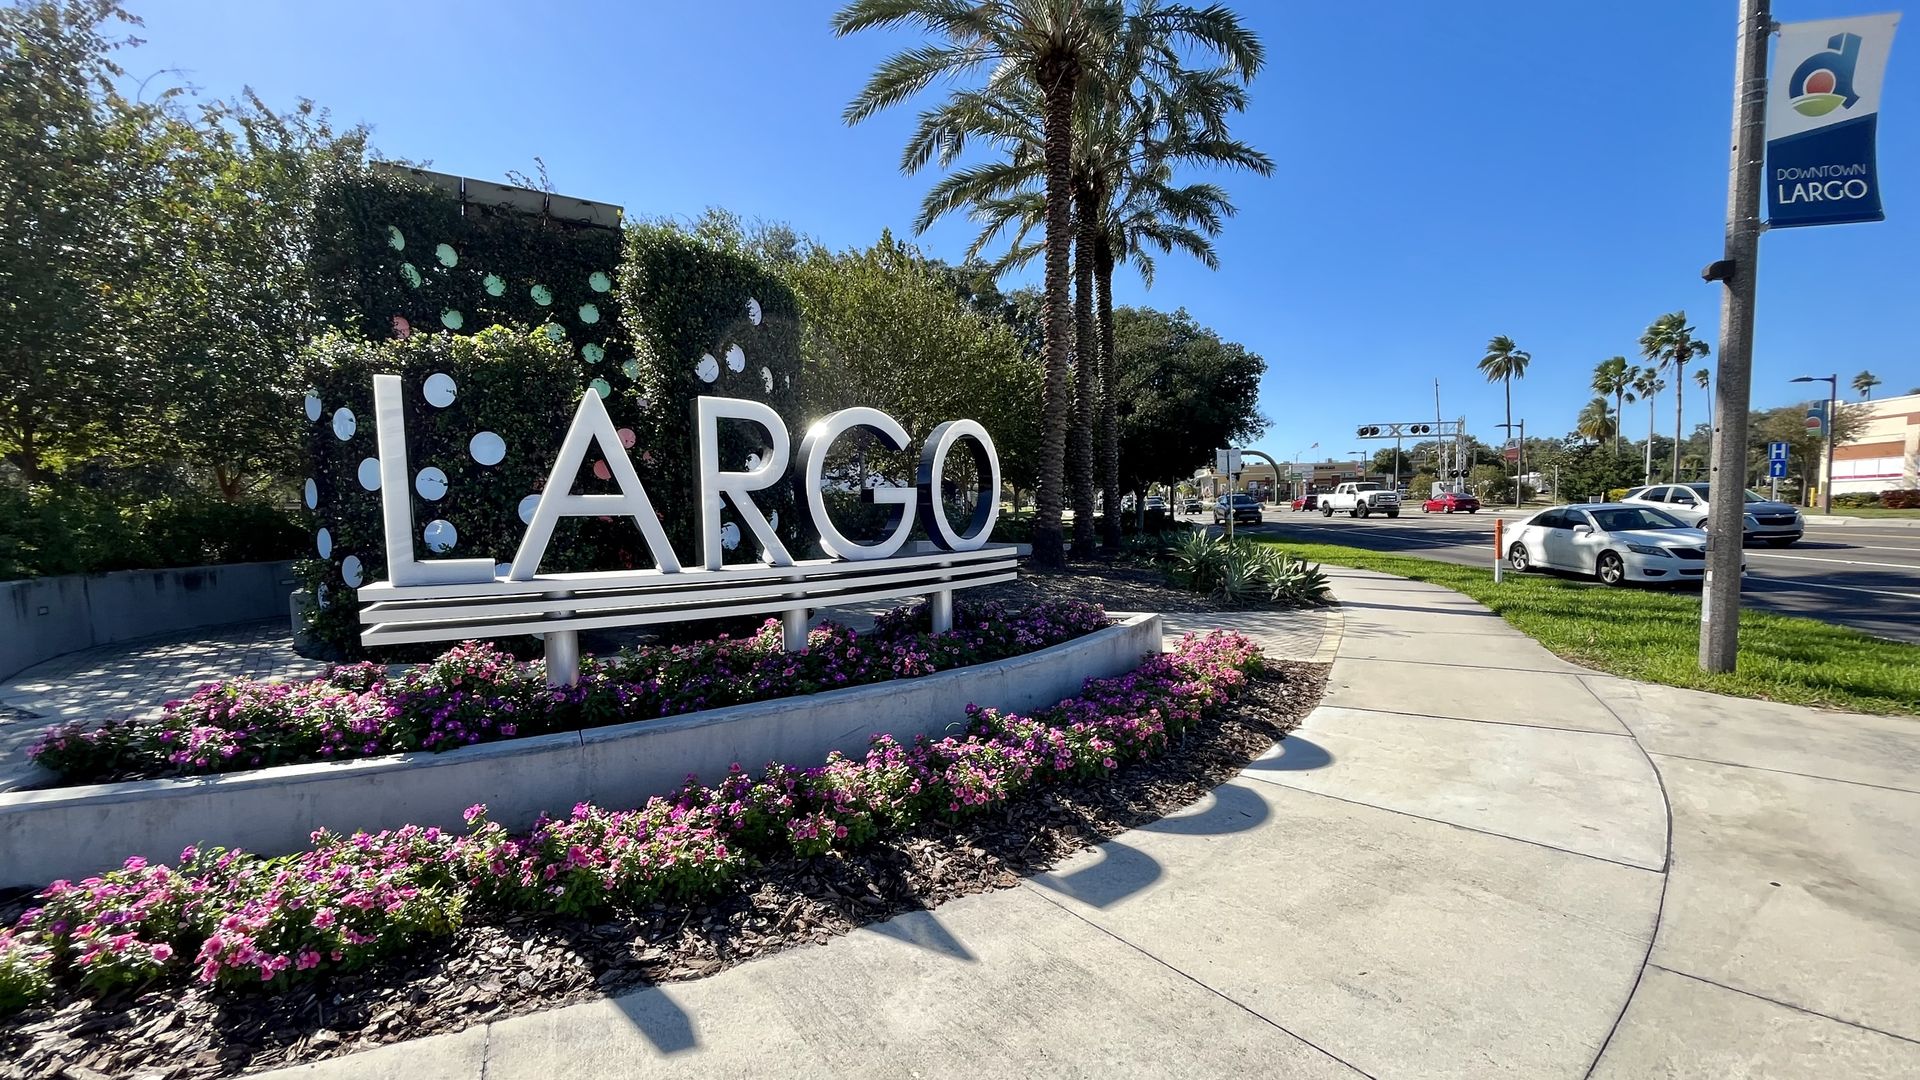 Things to do and eat in Largo, Florida - Axios Tampa Bay